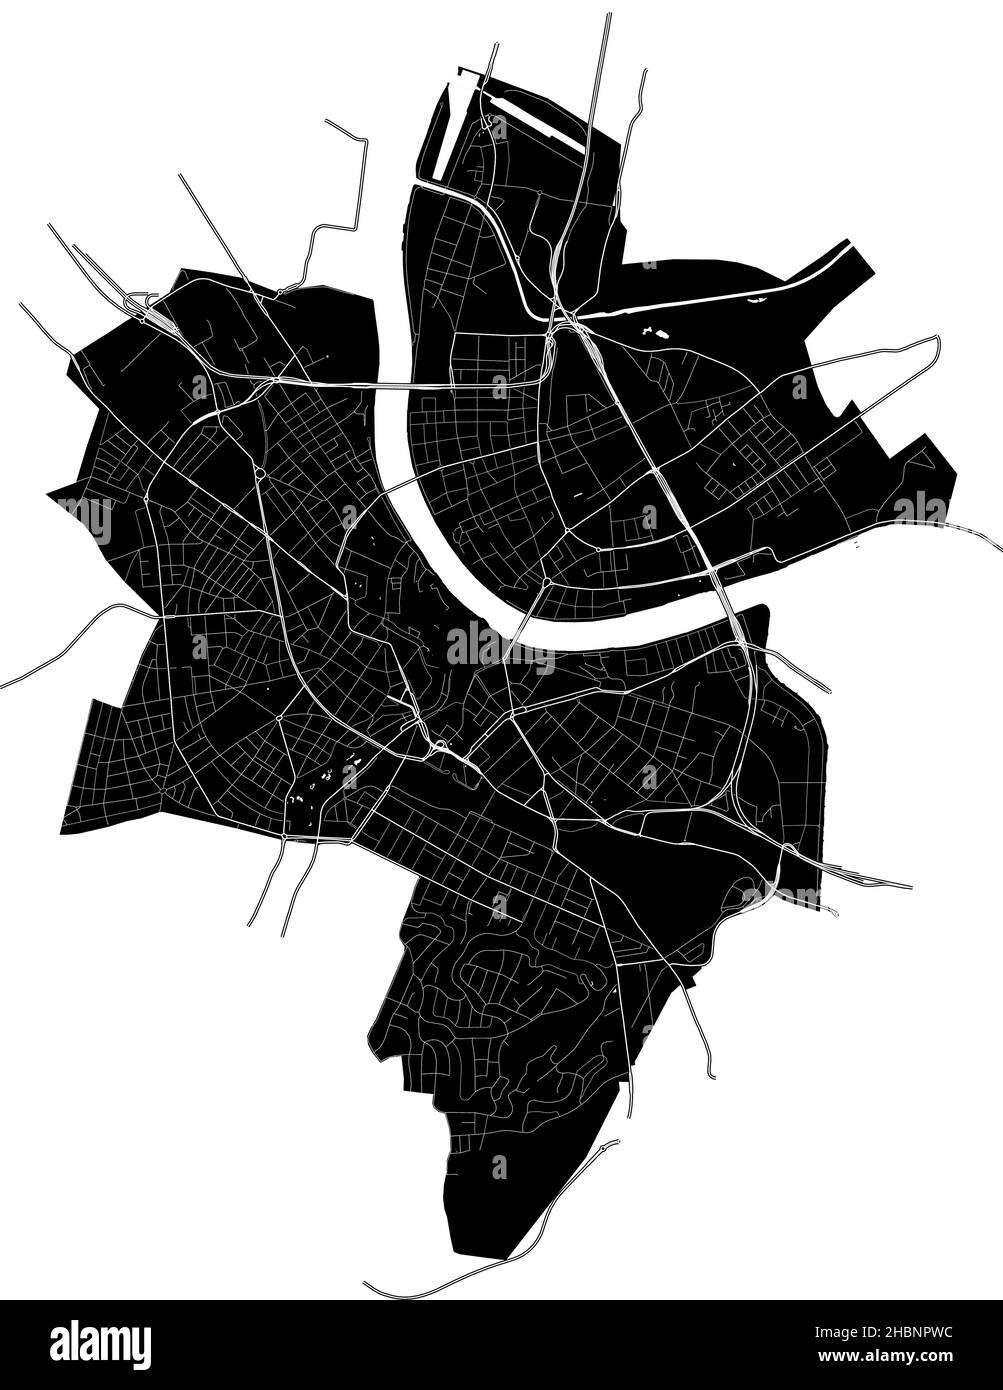 Basel, Switzerland, high resolution vector map with city boundaries, and editable paths. The city map was drawn with white areas and lines for main ro Stock Vector